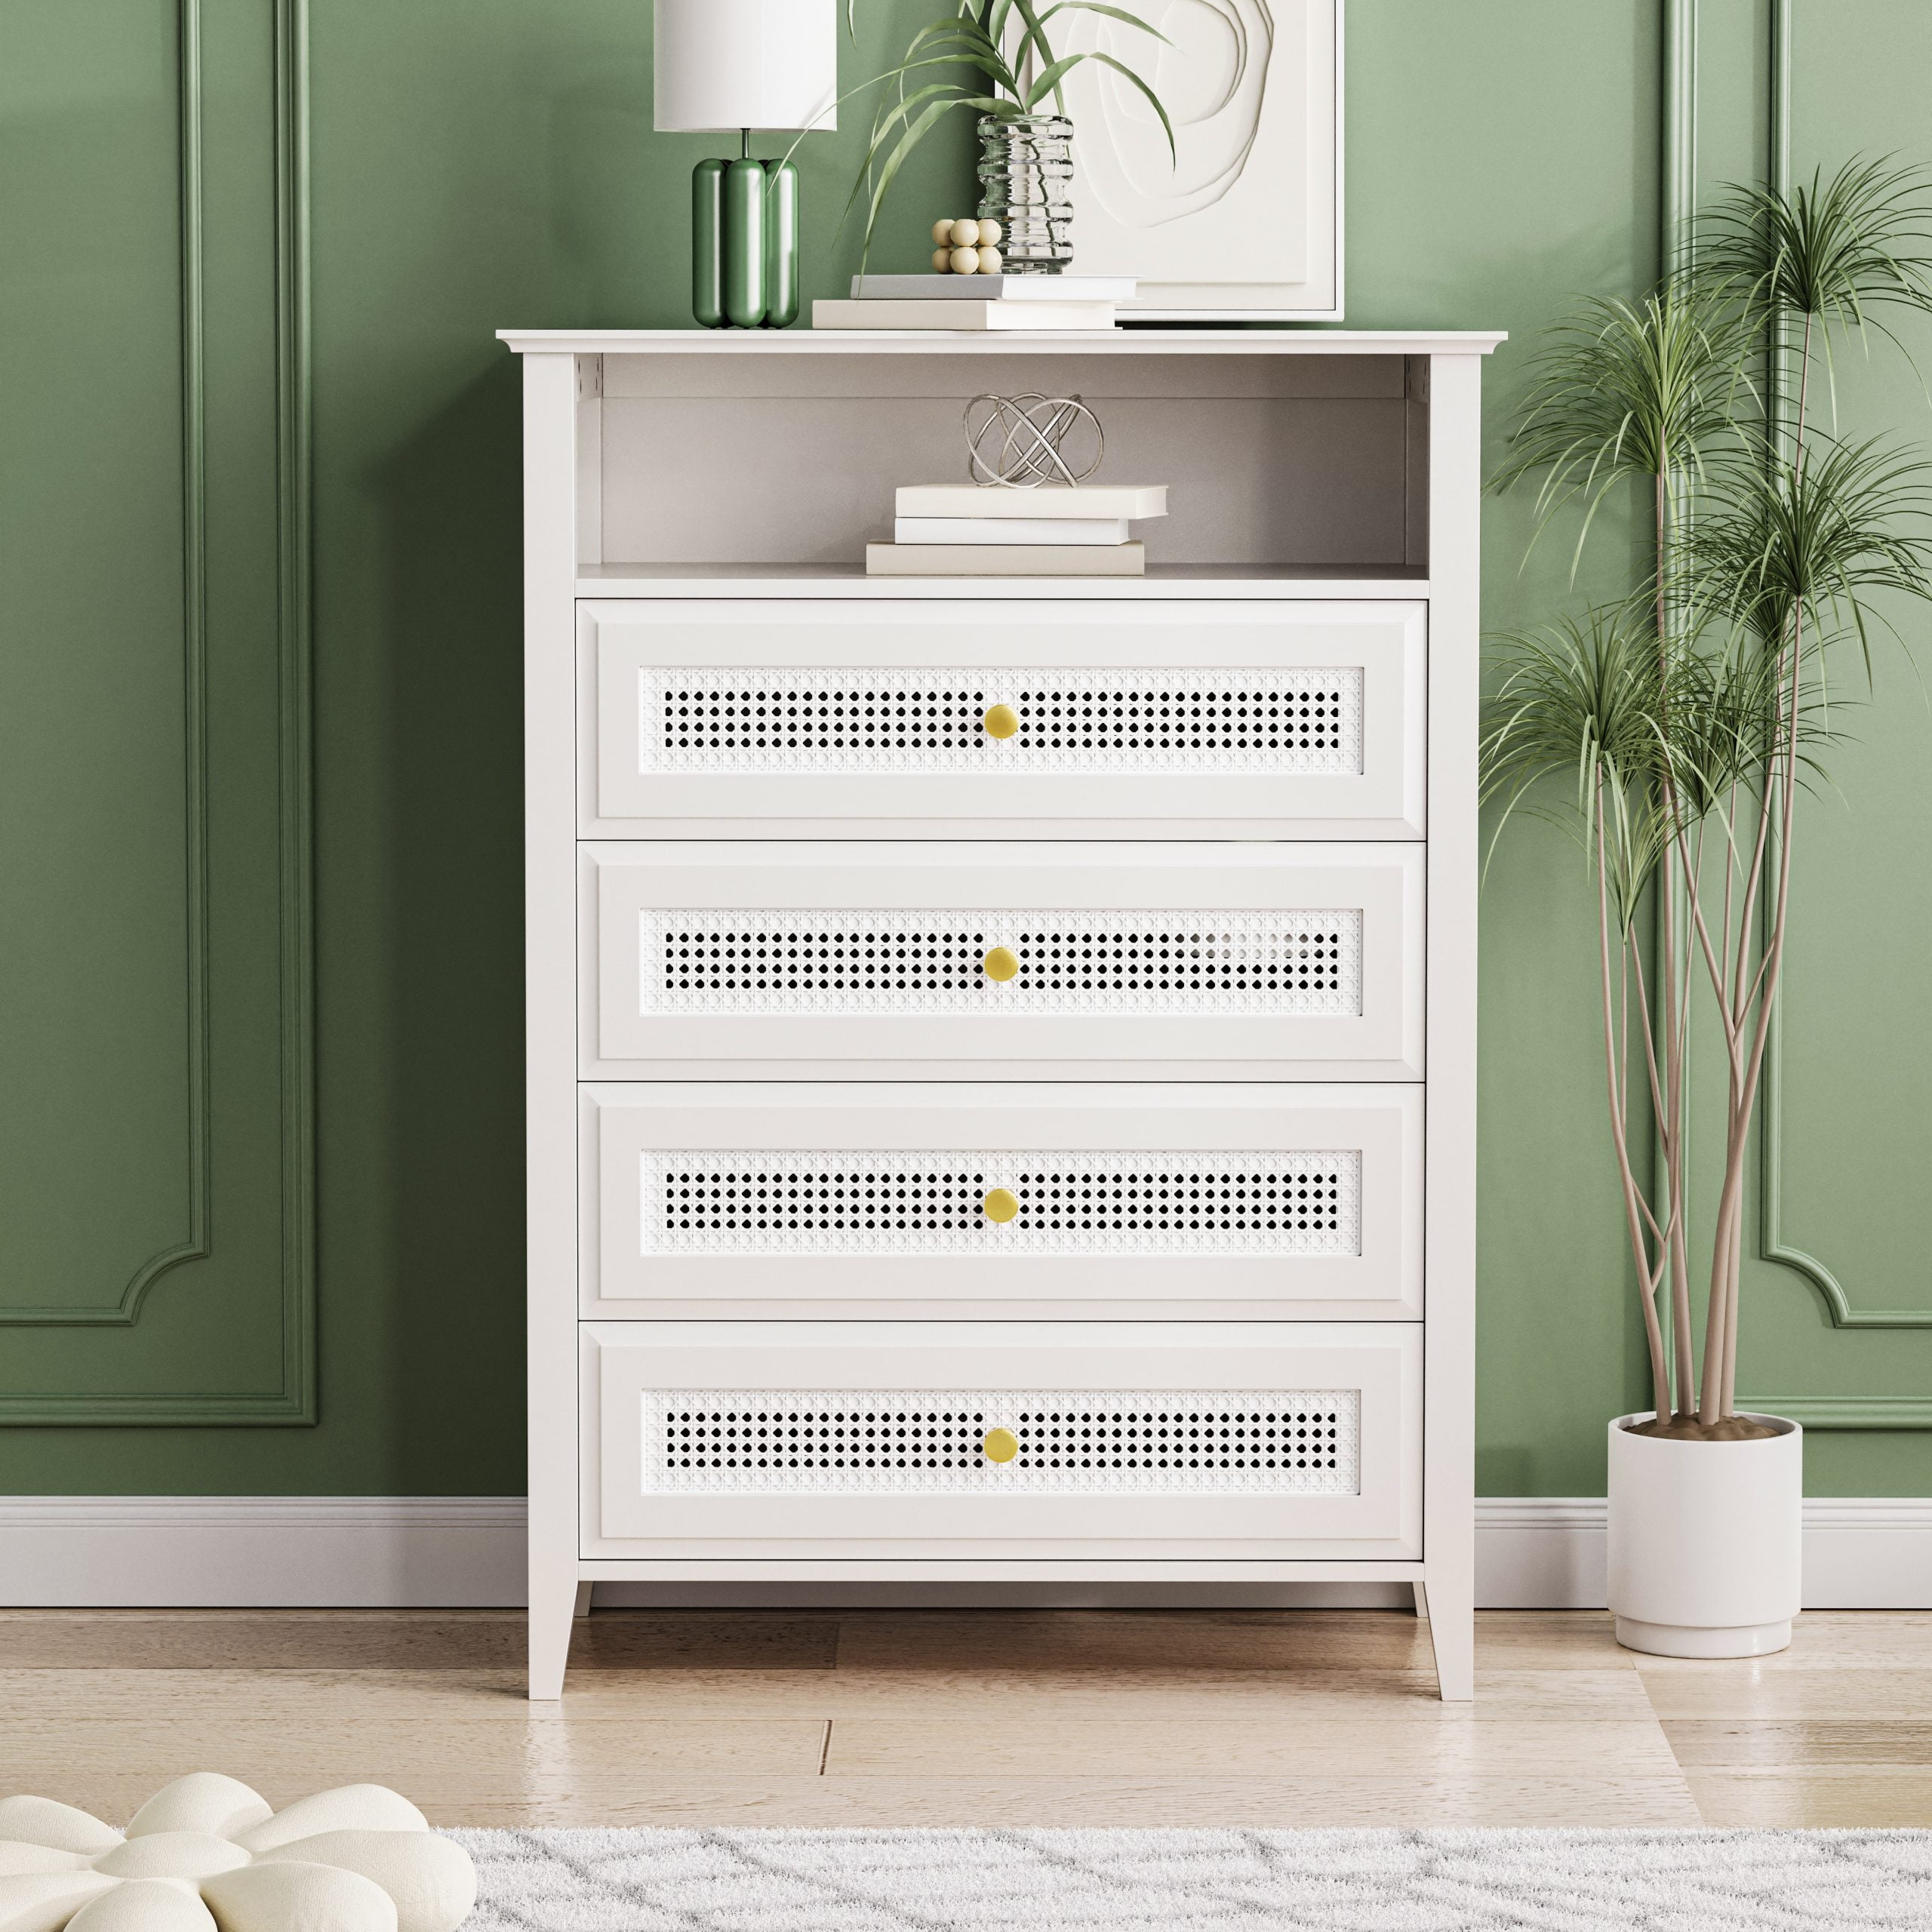 Retro Style Chest Of Drawers With Rattan Panels - WF303857AAK